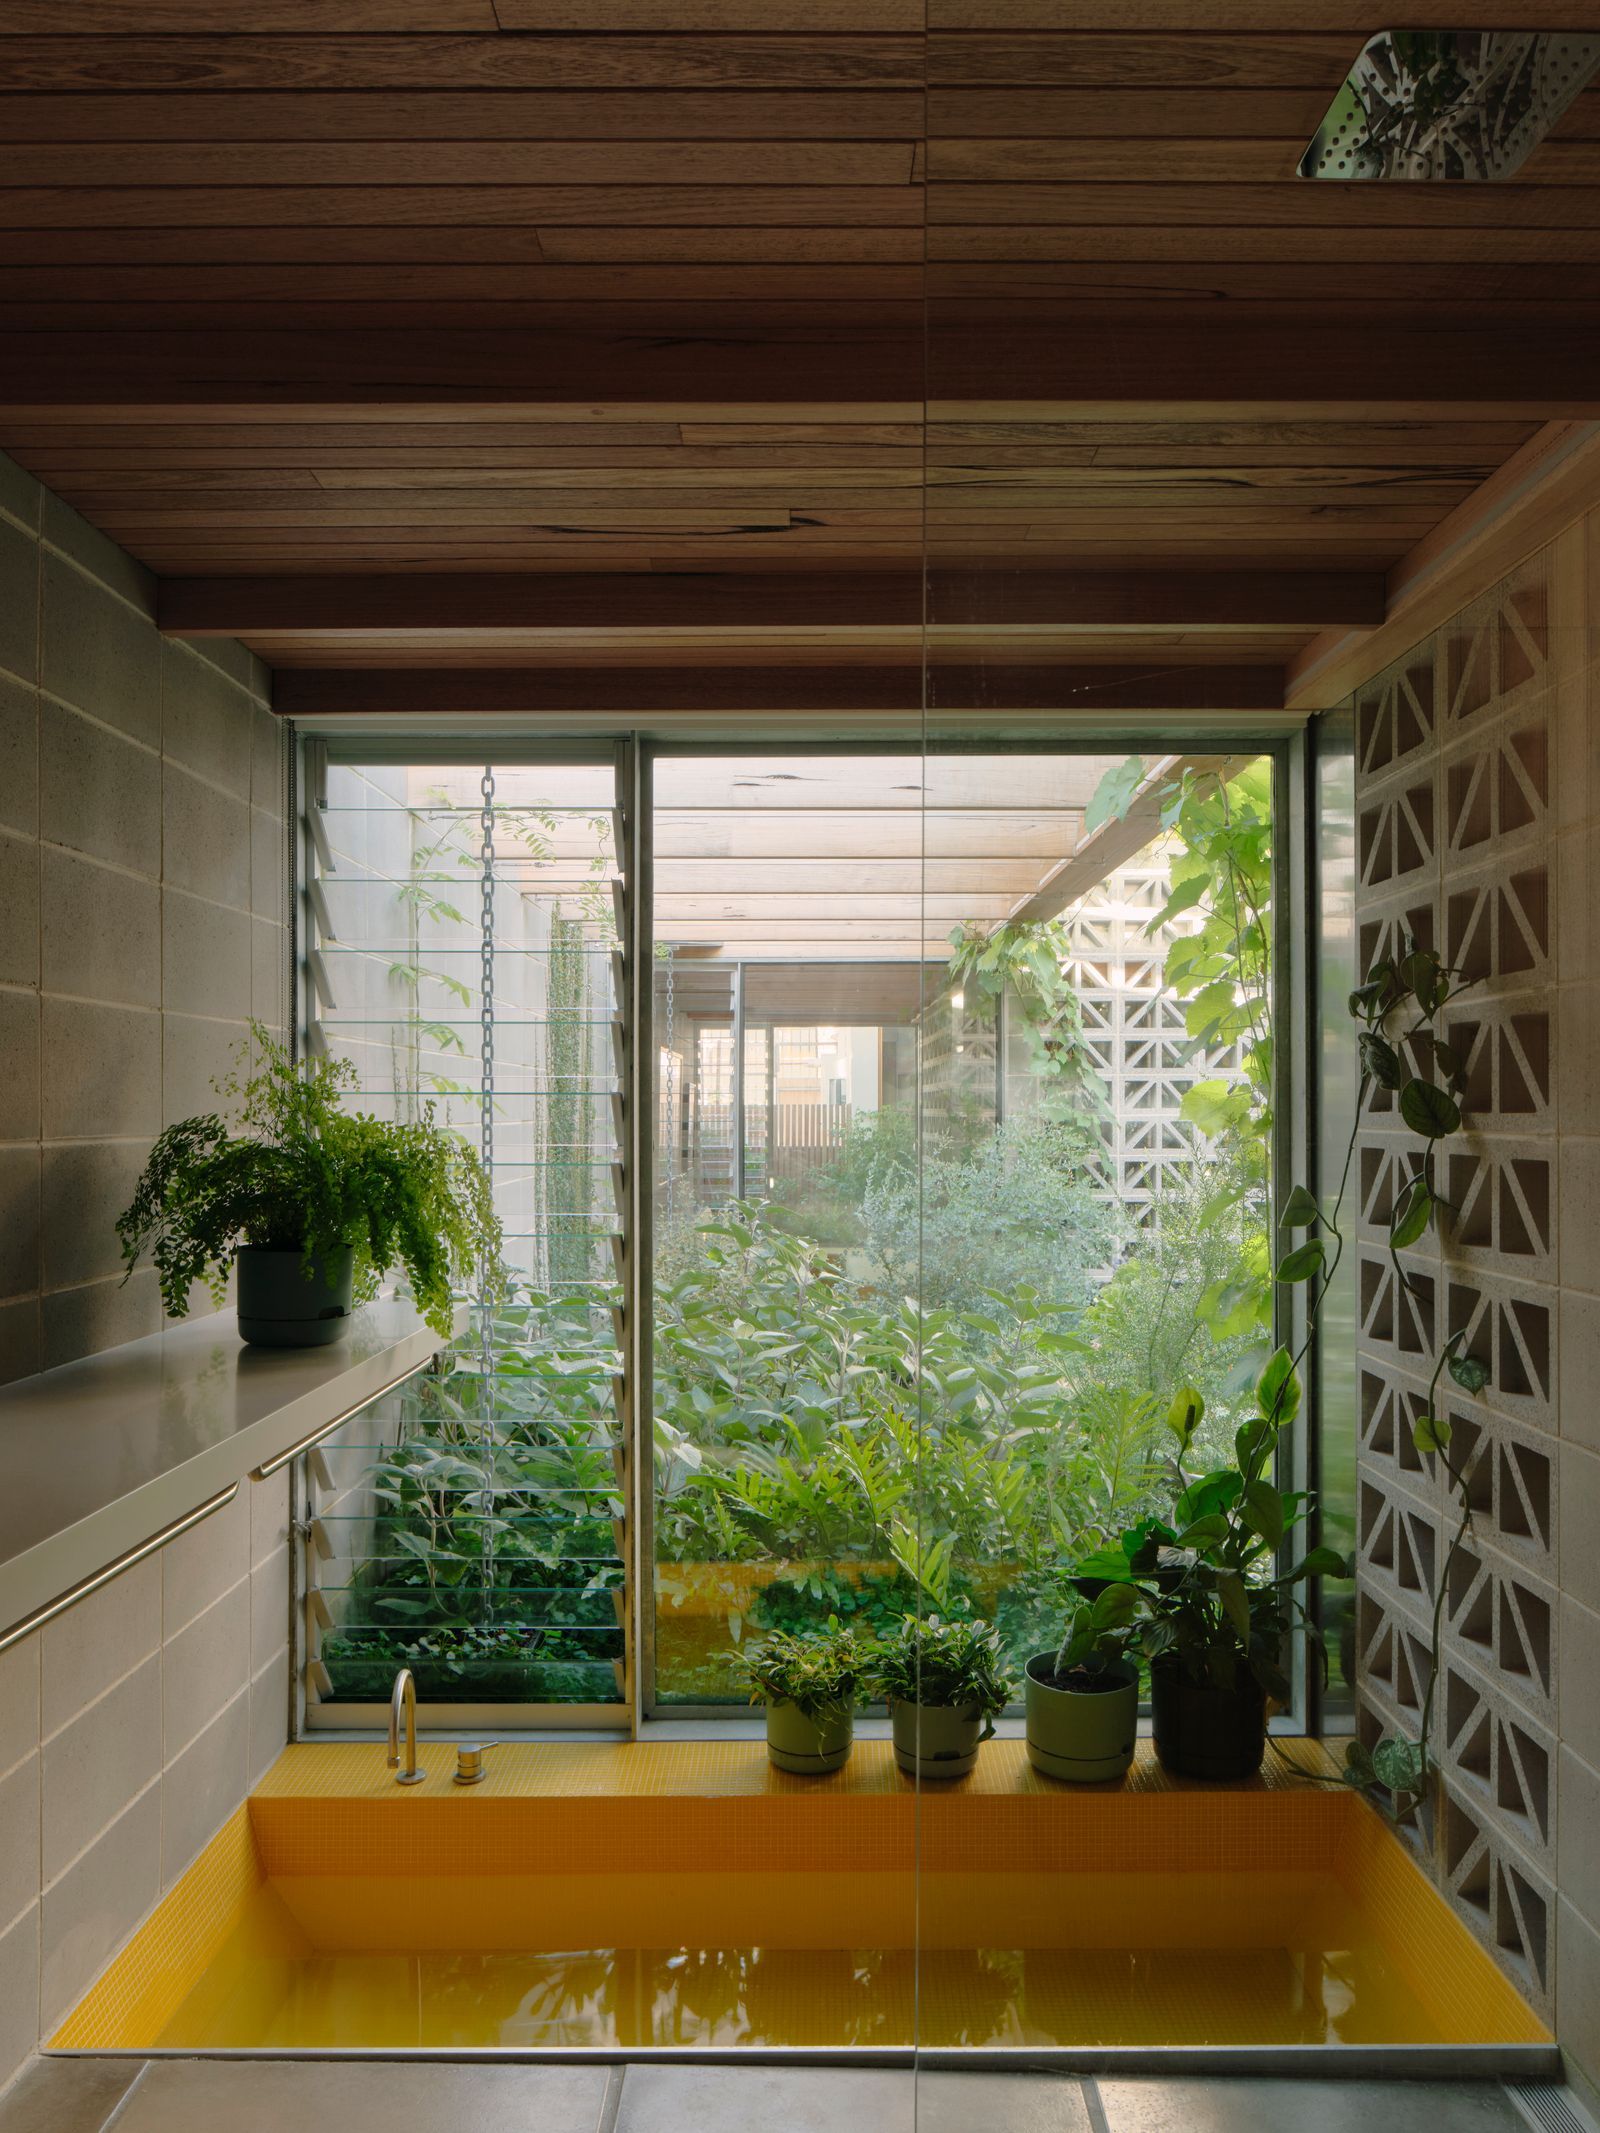 Sunday by Architecture architecture bathroom shot showing a yellow bathtub that looks out to an internal courtyard